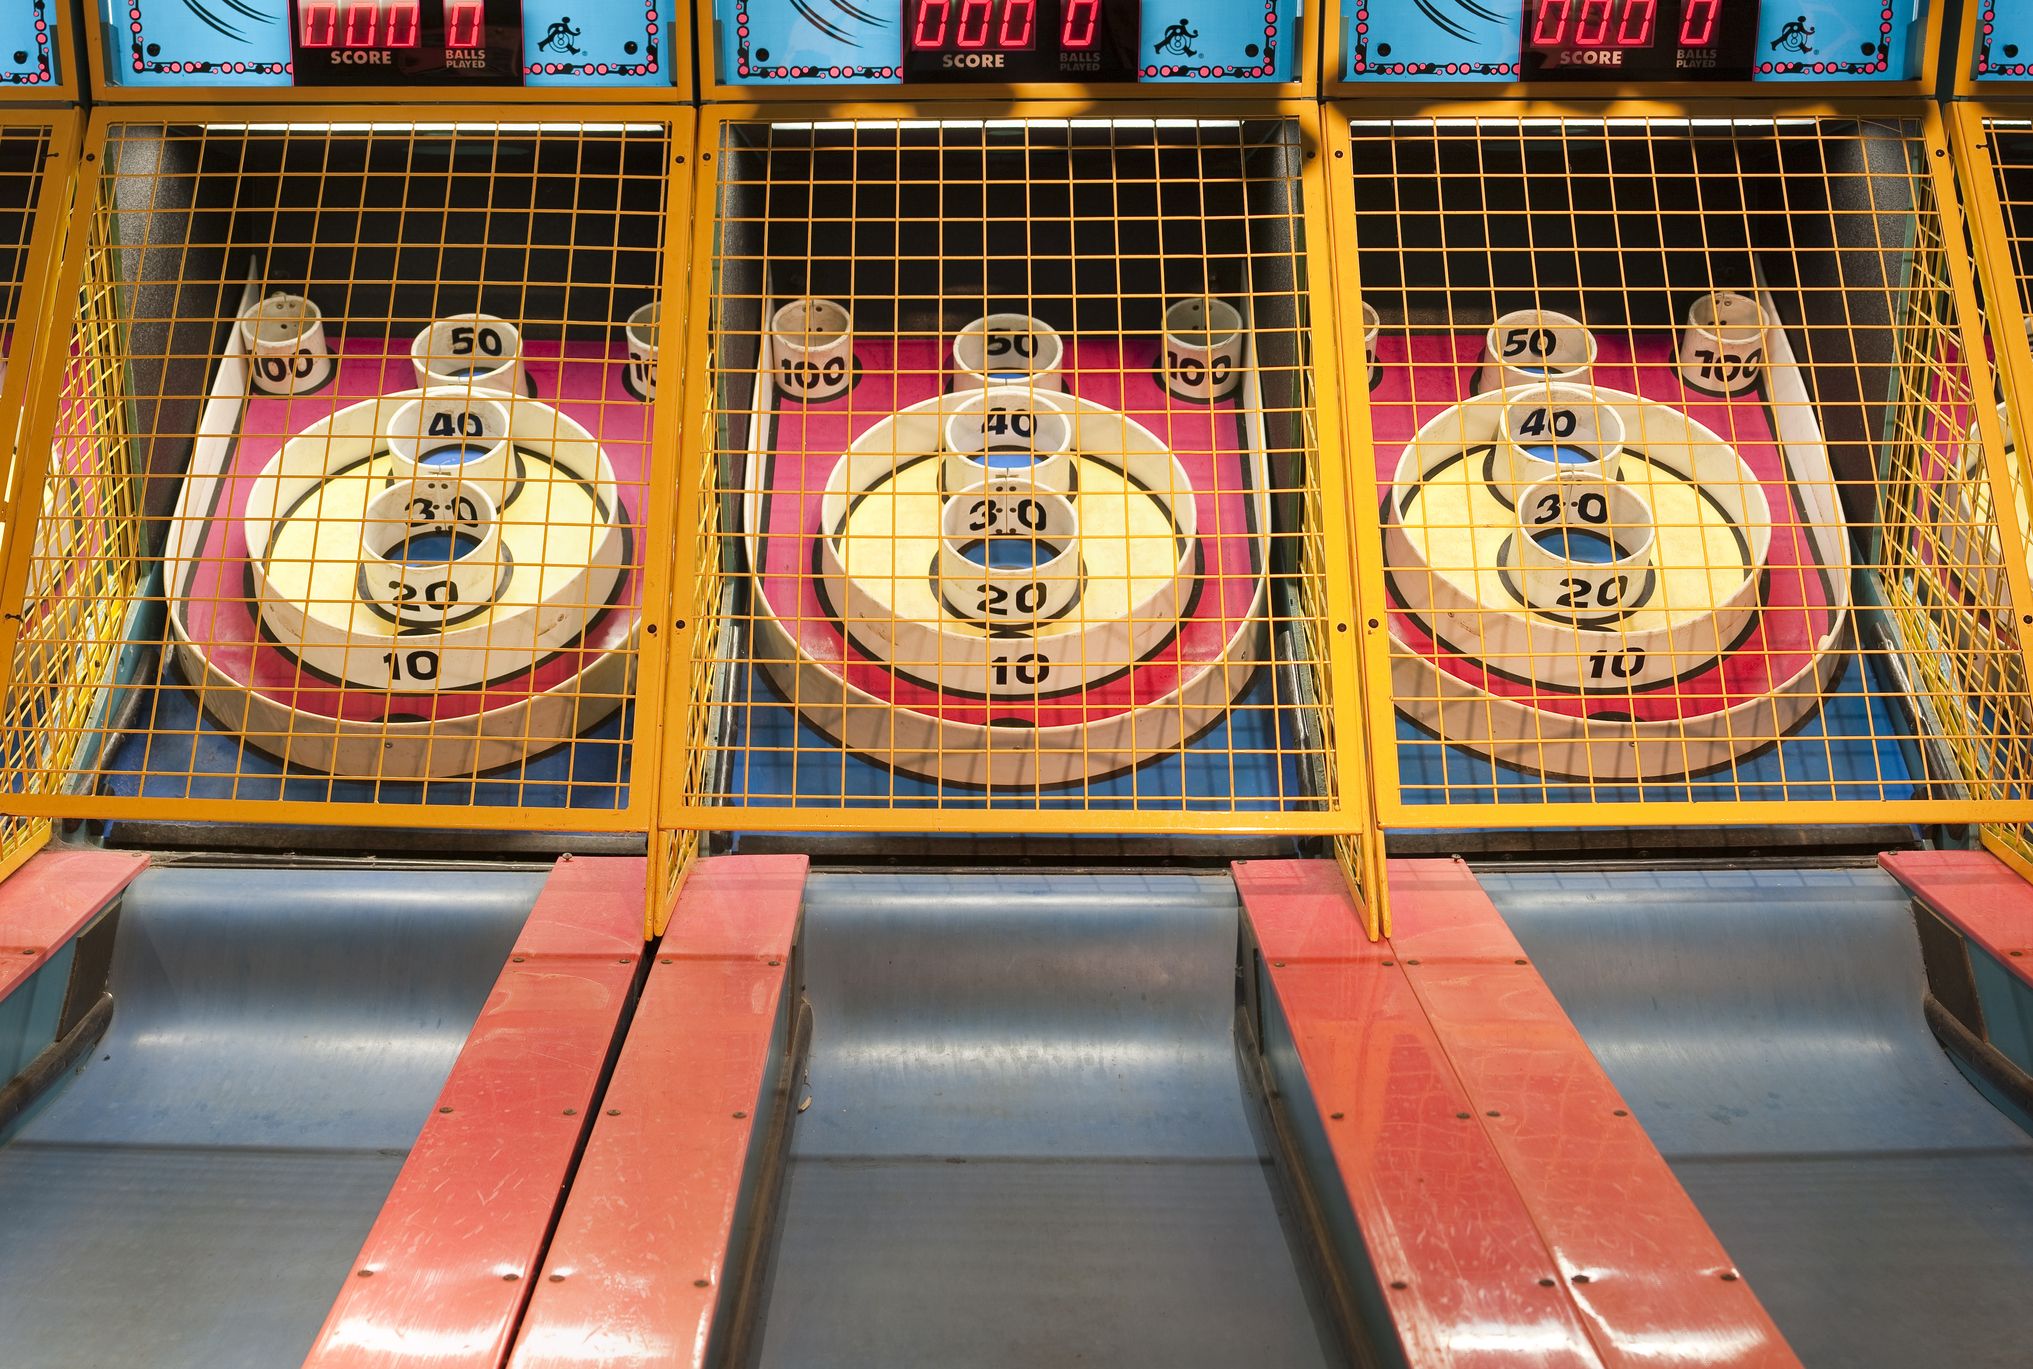 Pro Tips for How to Improve Your Skee-Ball Game | Mental